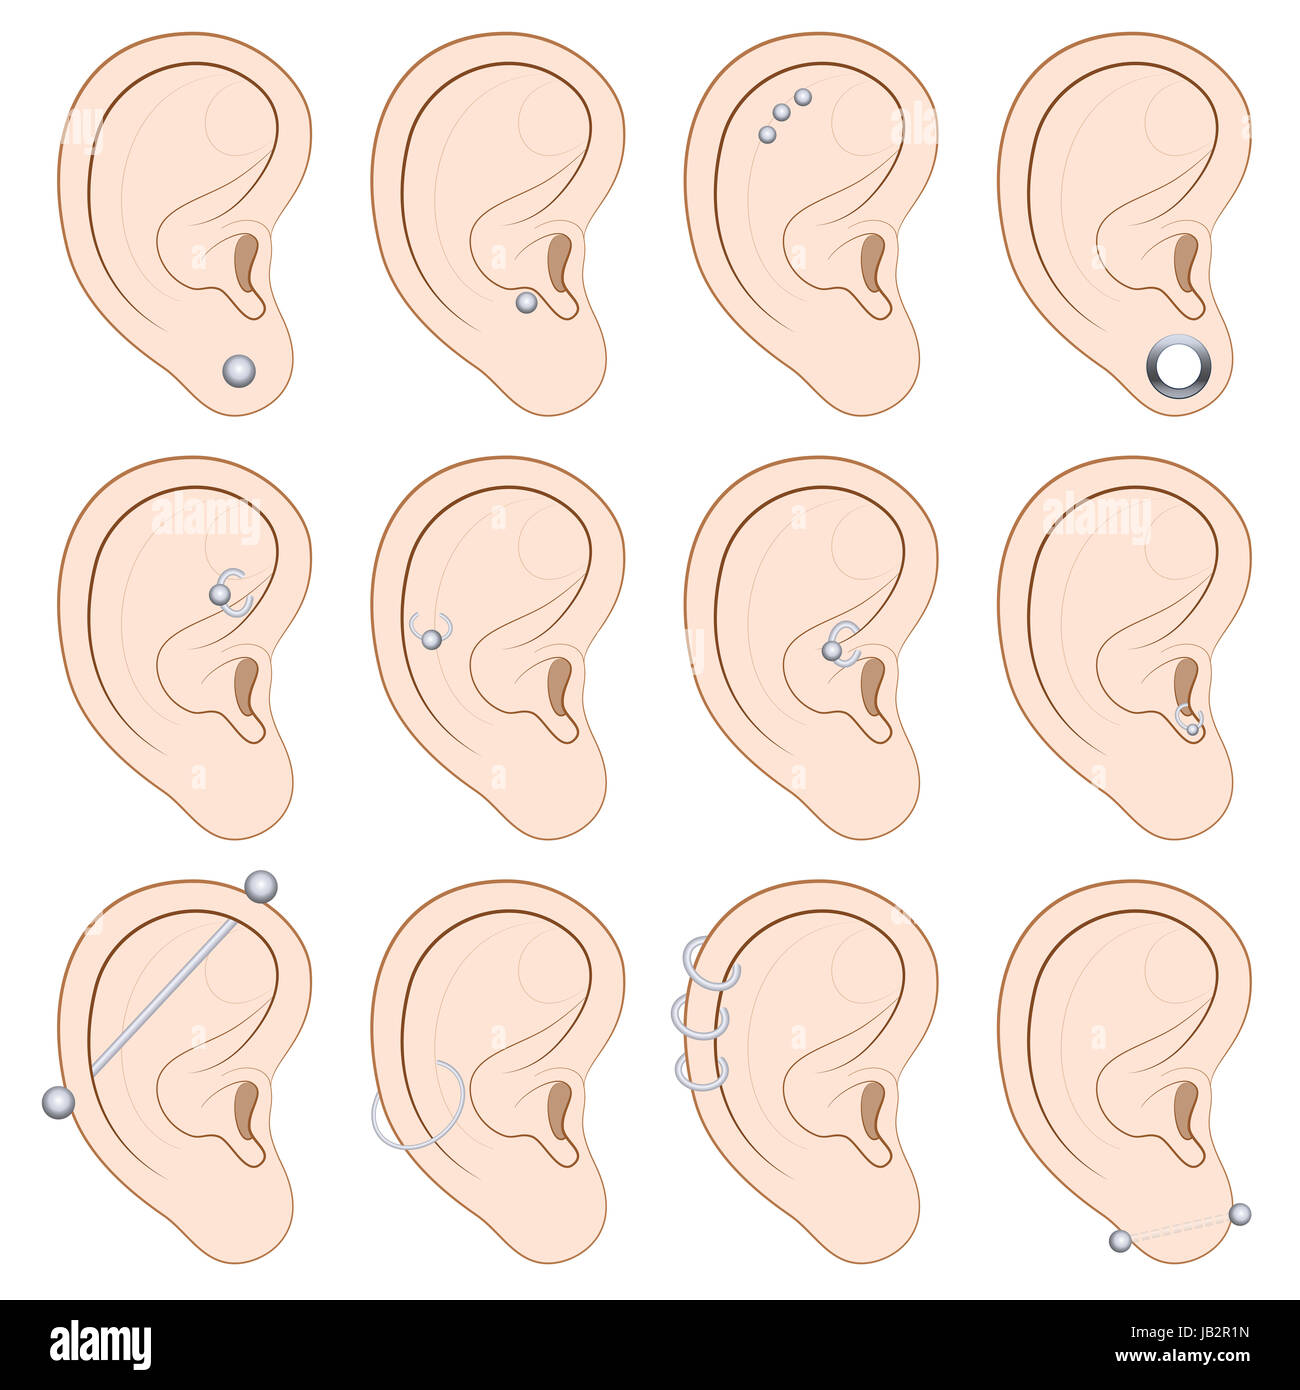 Ear piercings chart - twelve different illustrated examples on white background. Stock Photo